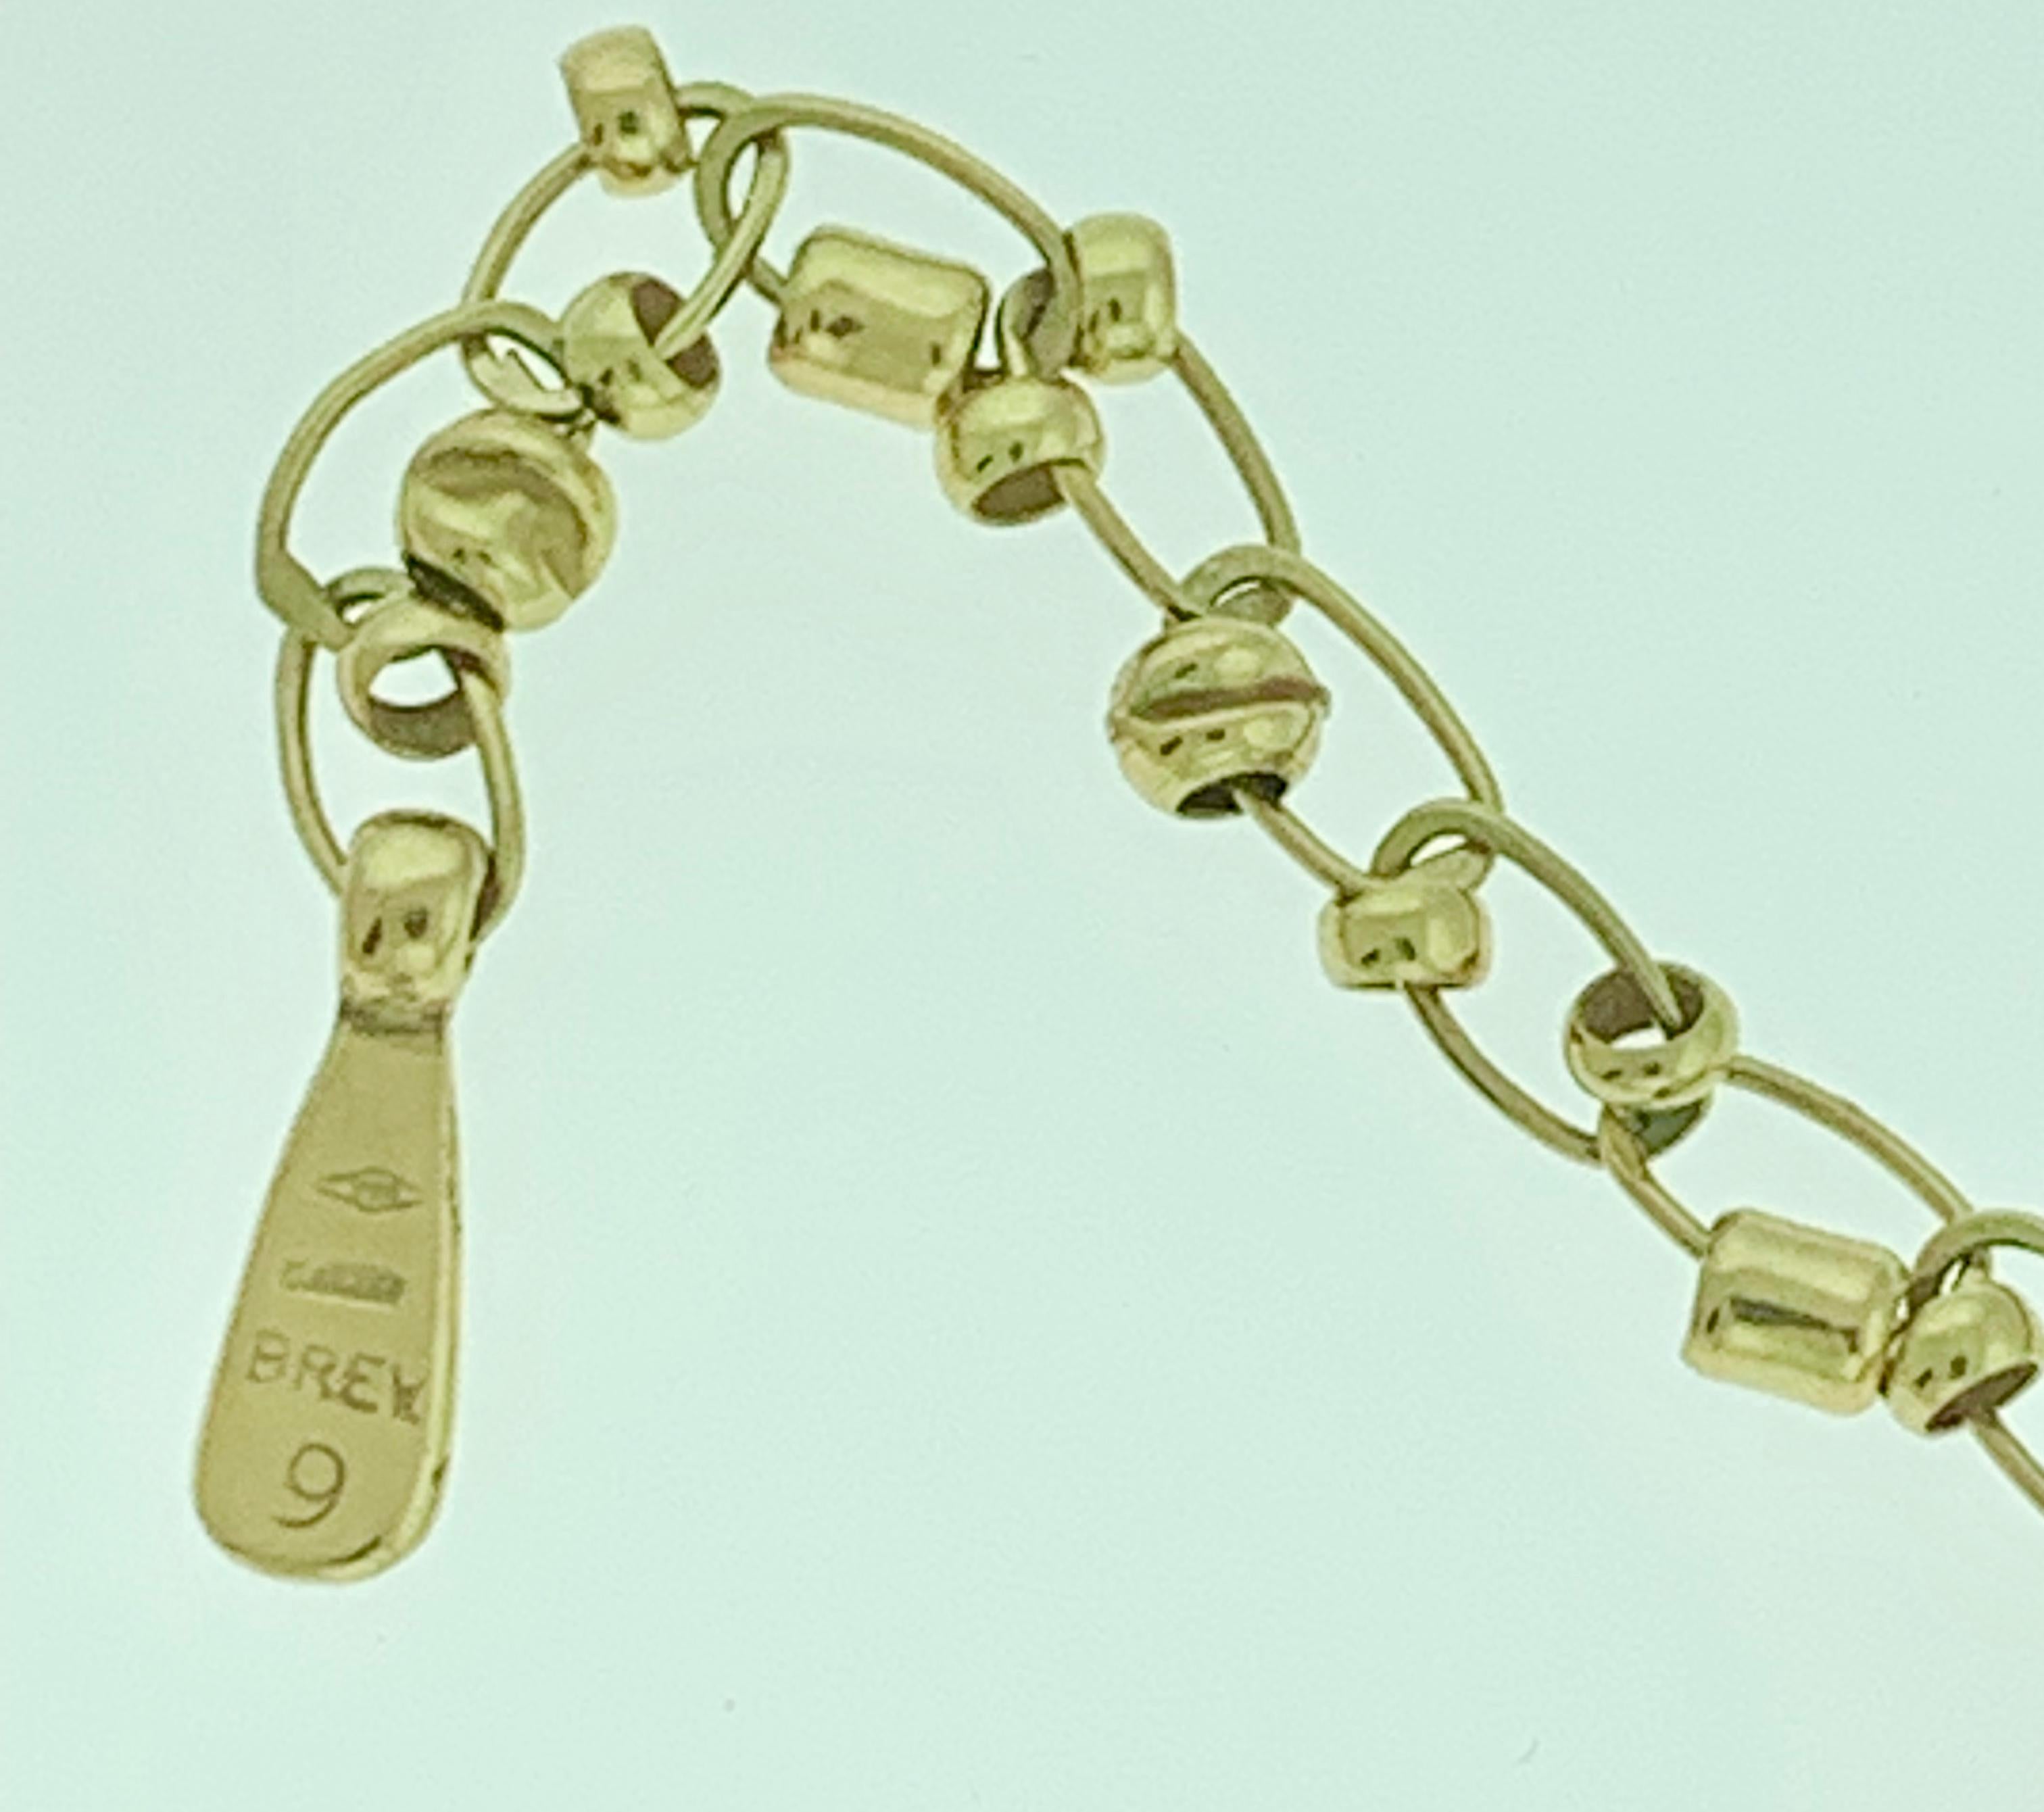 132 Gm 18 Karat Yellow Gold Designer Orlando-Orlandini Necklace In Excellent Condition For Sale In New York, NY